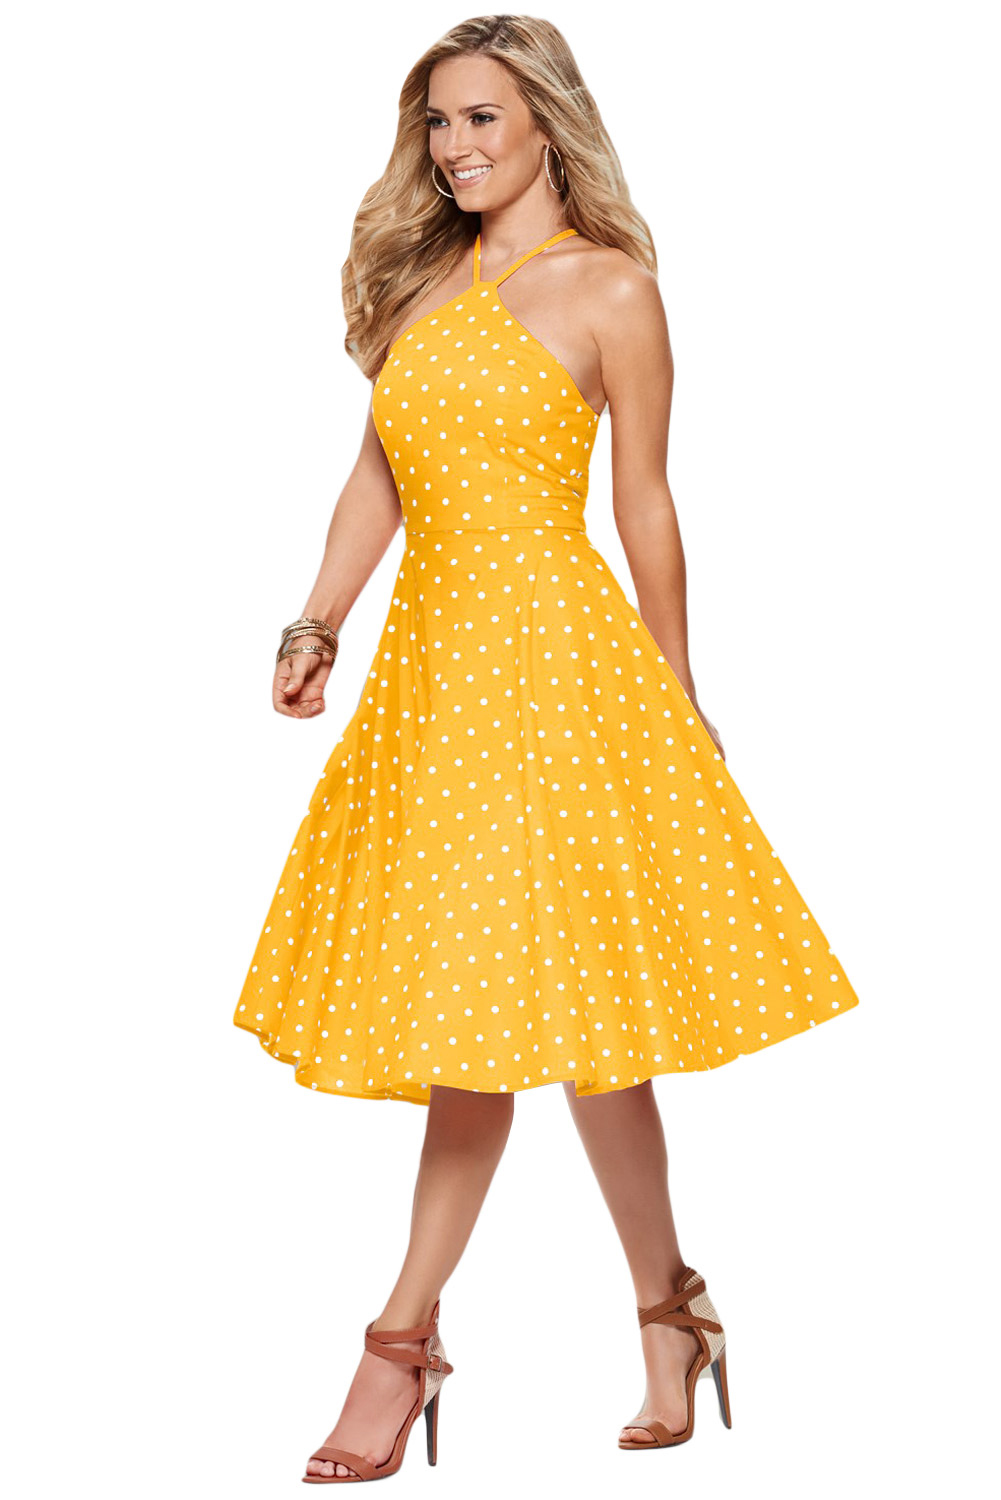 BY610141-7 Yellow White Polka Dot Flared Vintage Dress